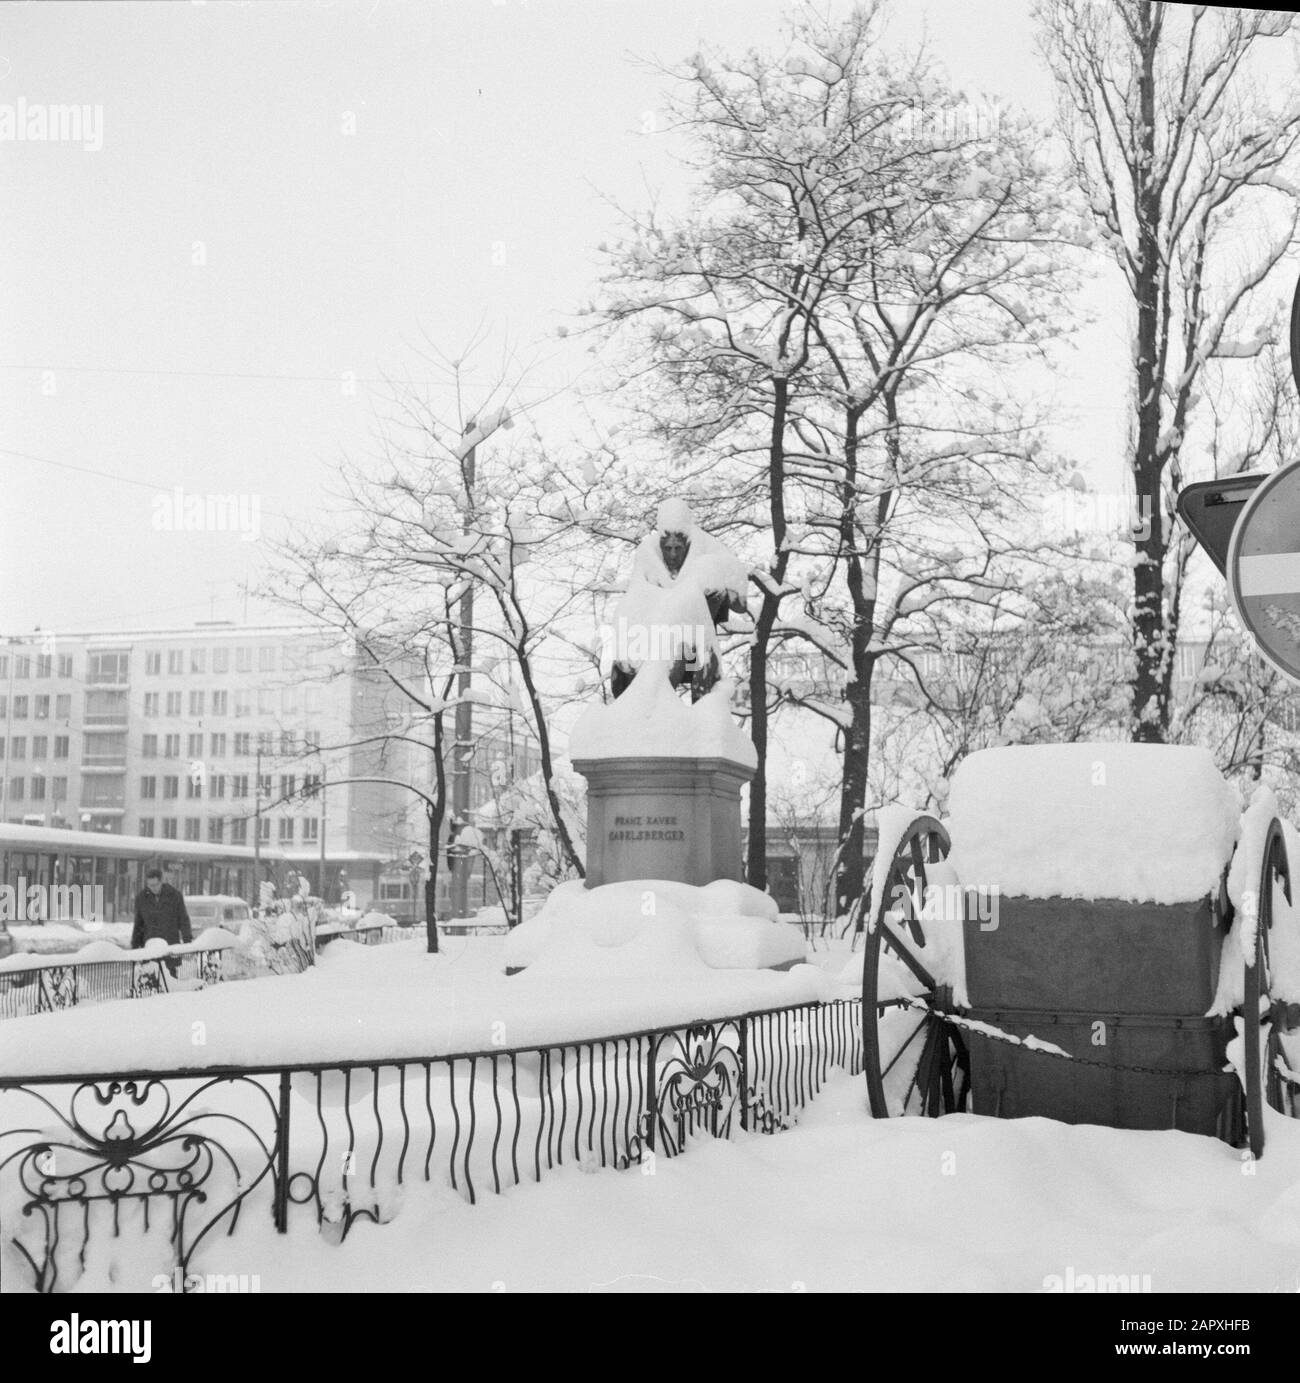 Visit to Munich  Statue of Franz Xaver Gabelsberger, inventor of a stenographic writing, in the snow Date: December 1, 1958 Location: Bavaria, Germany, Munich, West Germany Keywords: carriages, snow, statues, winter Personal name: Gabelsberger, Franz Xaver Stock Photo